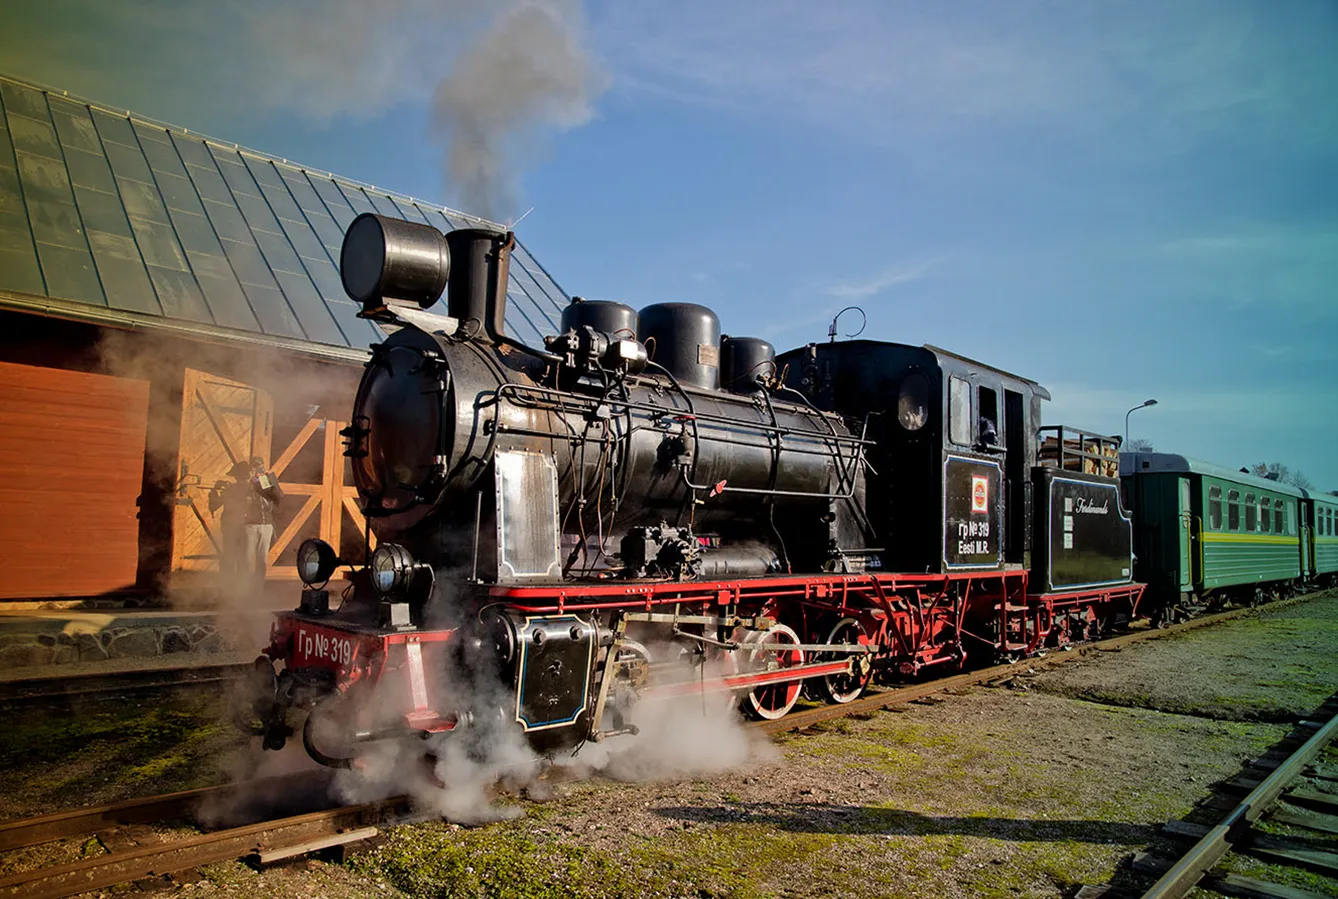 A steam locomotive pulls away from the station.